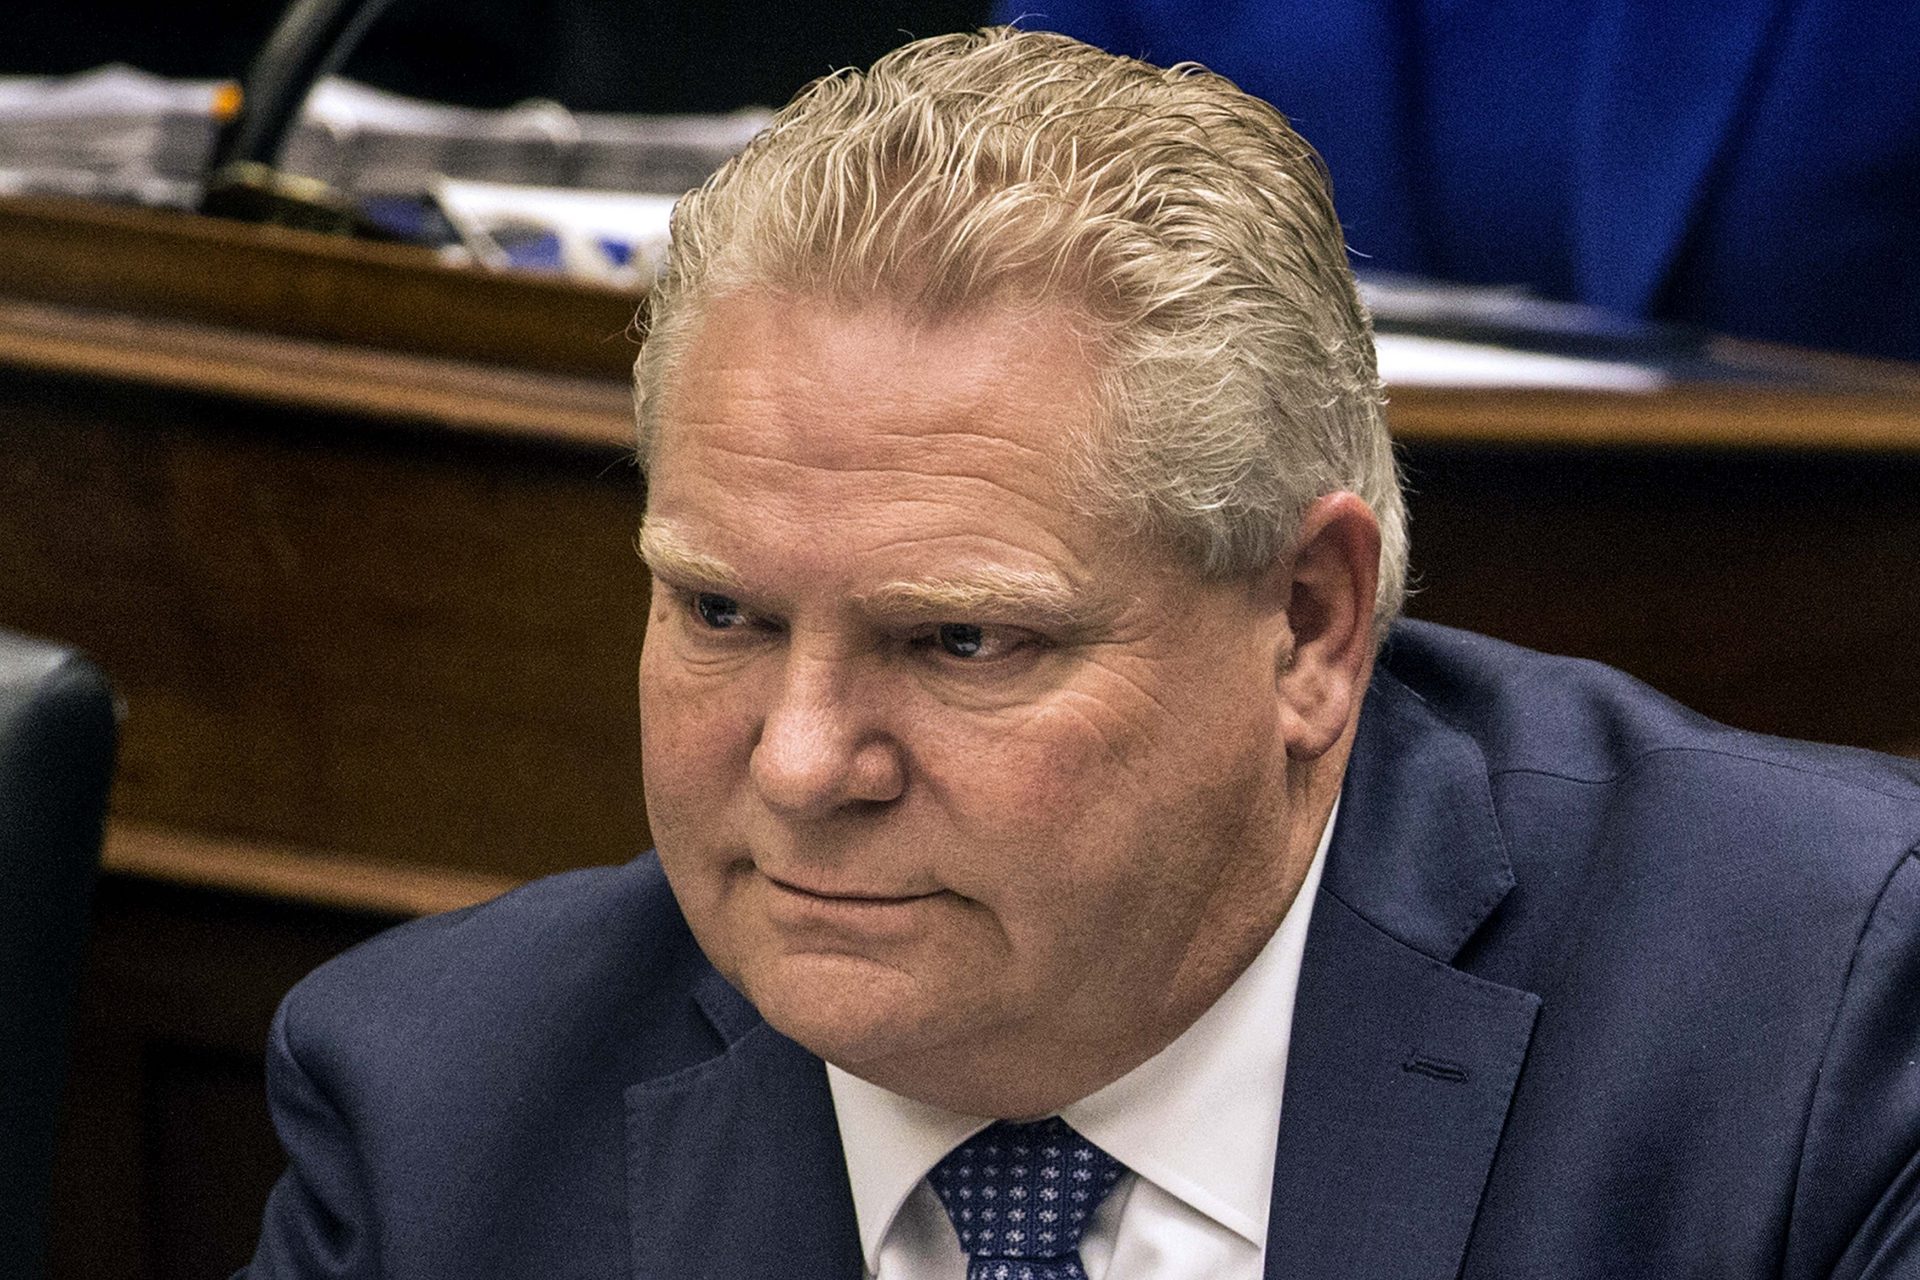 'General strike' against Doug Ford prompts criticism from left and right